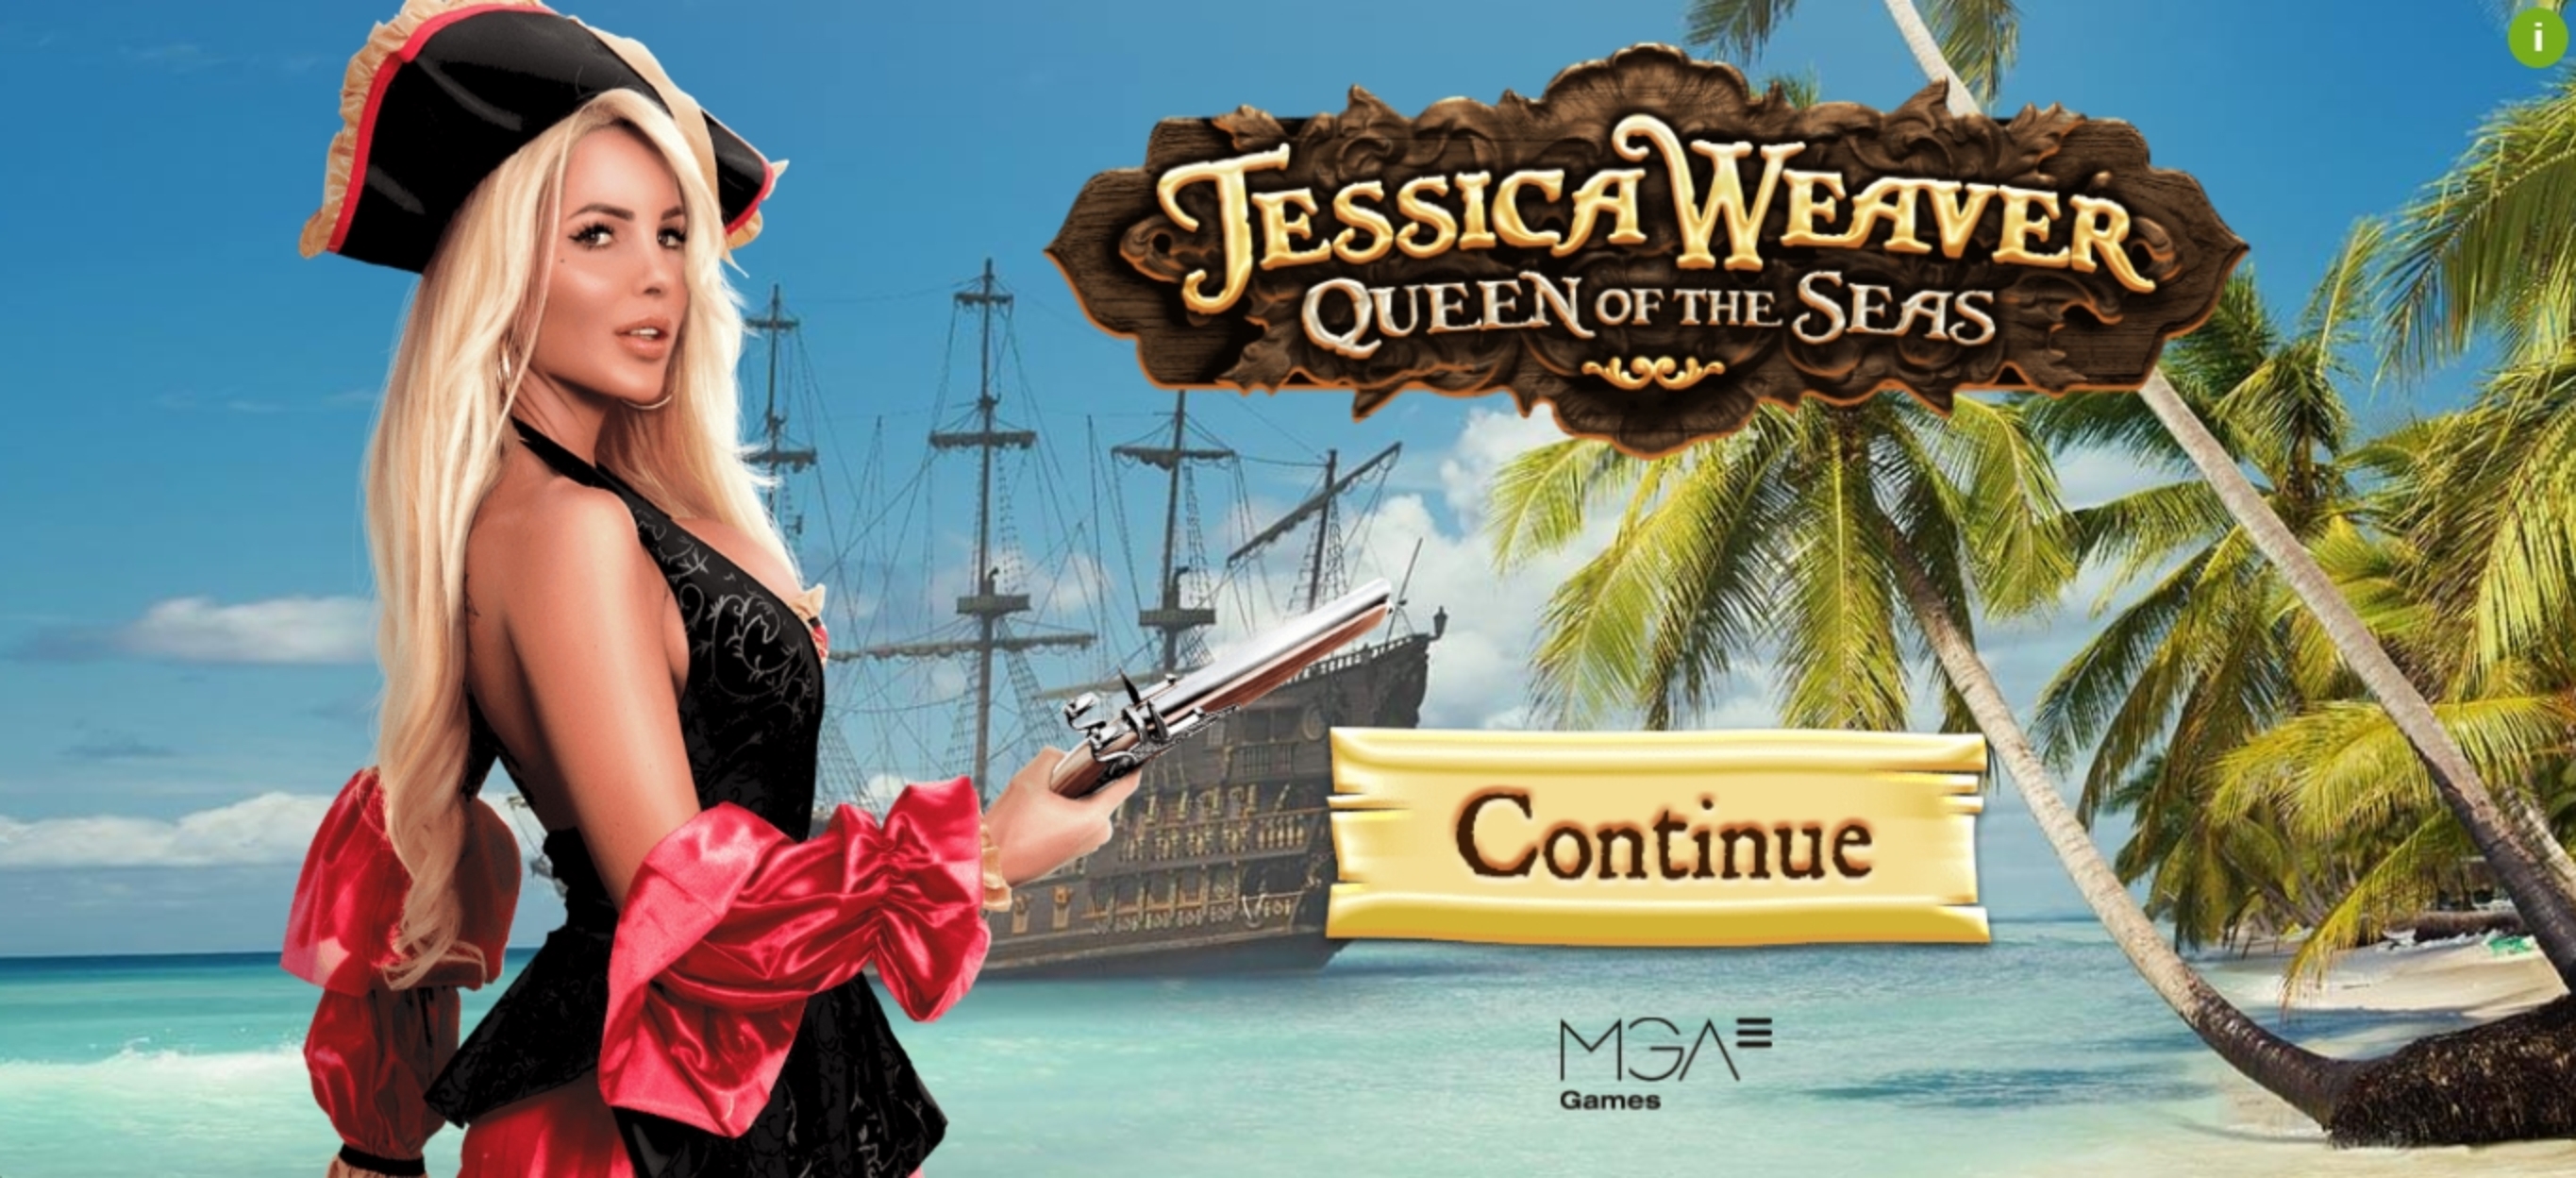 Play Jessica Weaver Queen of the Seas Free Casino Slot Game by MGA